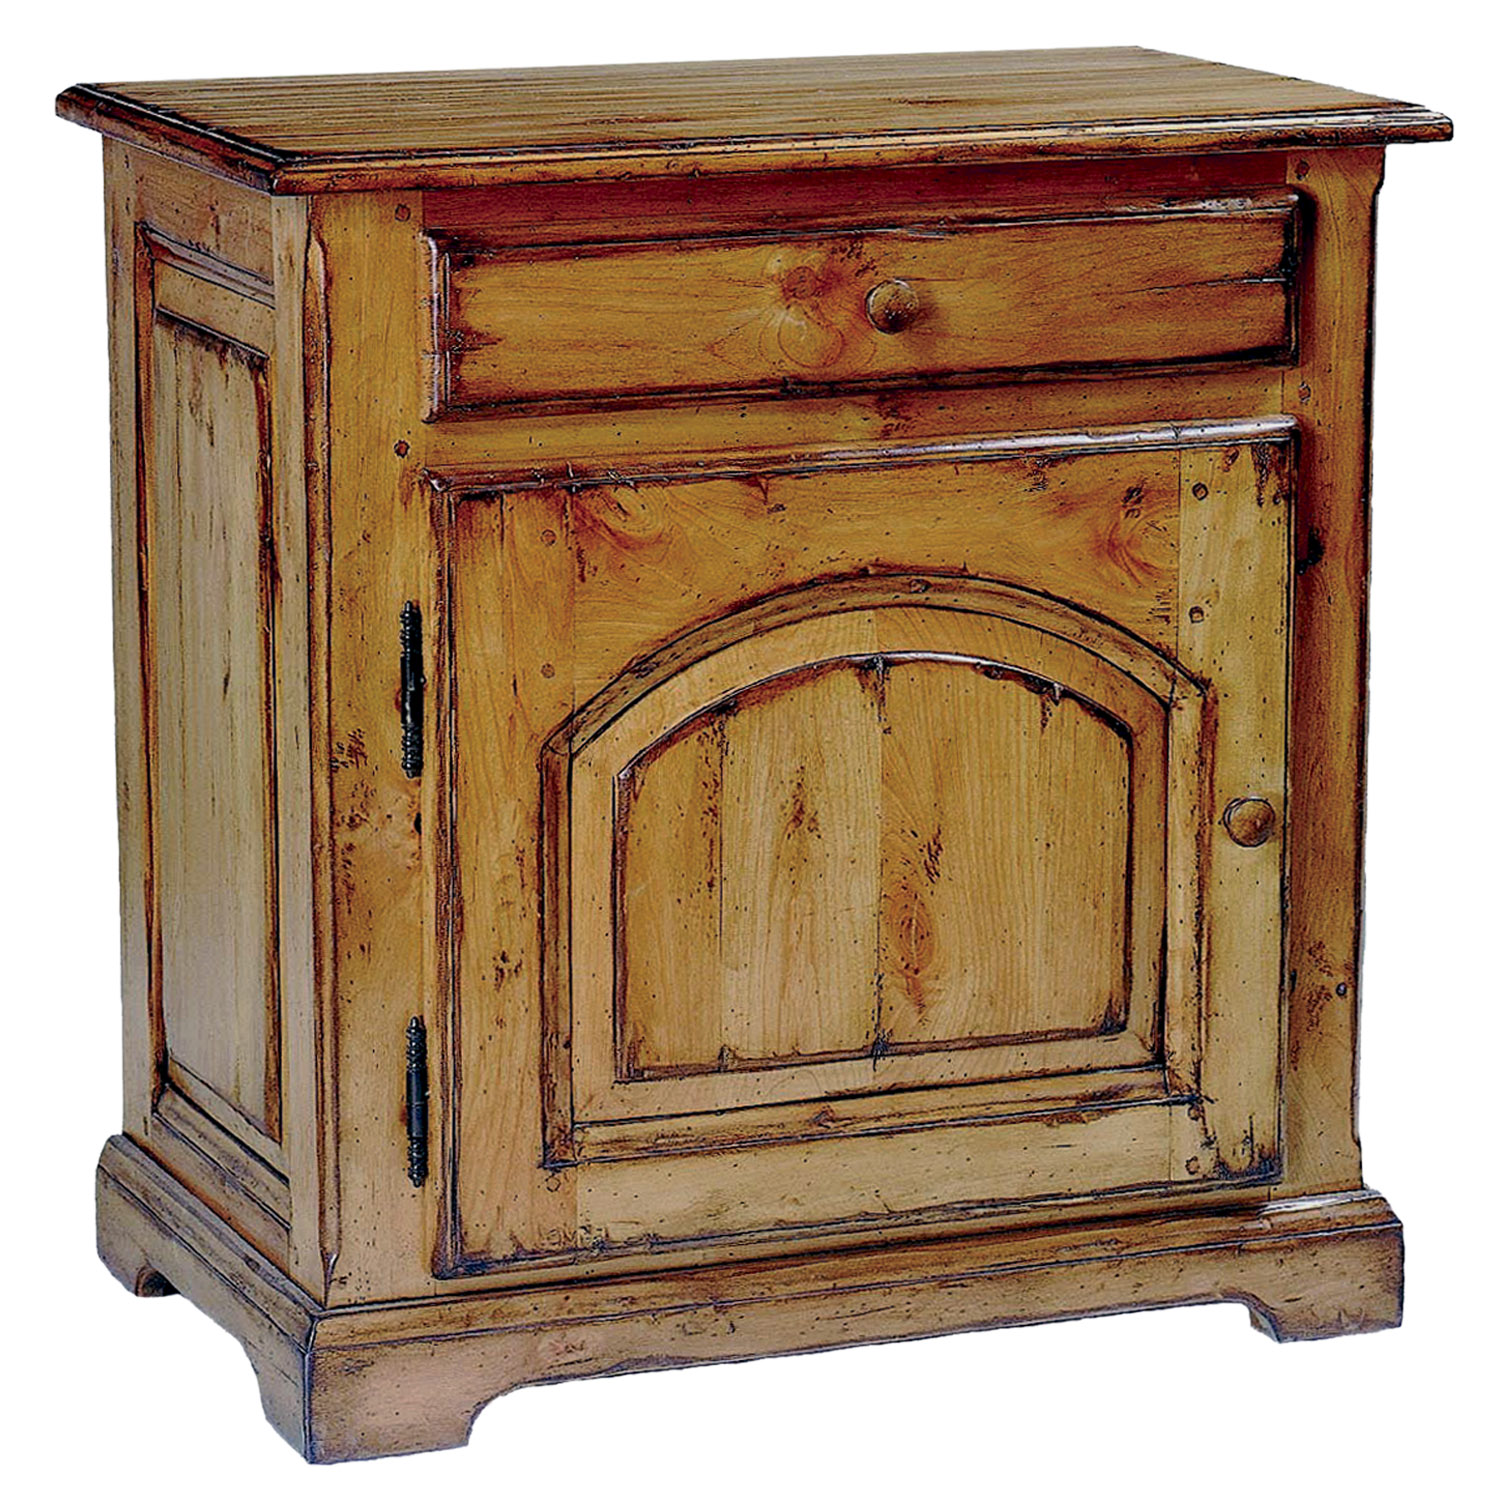 Schrifin traditional stained distressed cabinet end table side table with one door, one shelf and one drawer by Woodland furniture in Idaho Falls